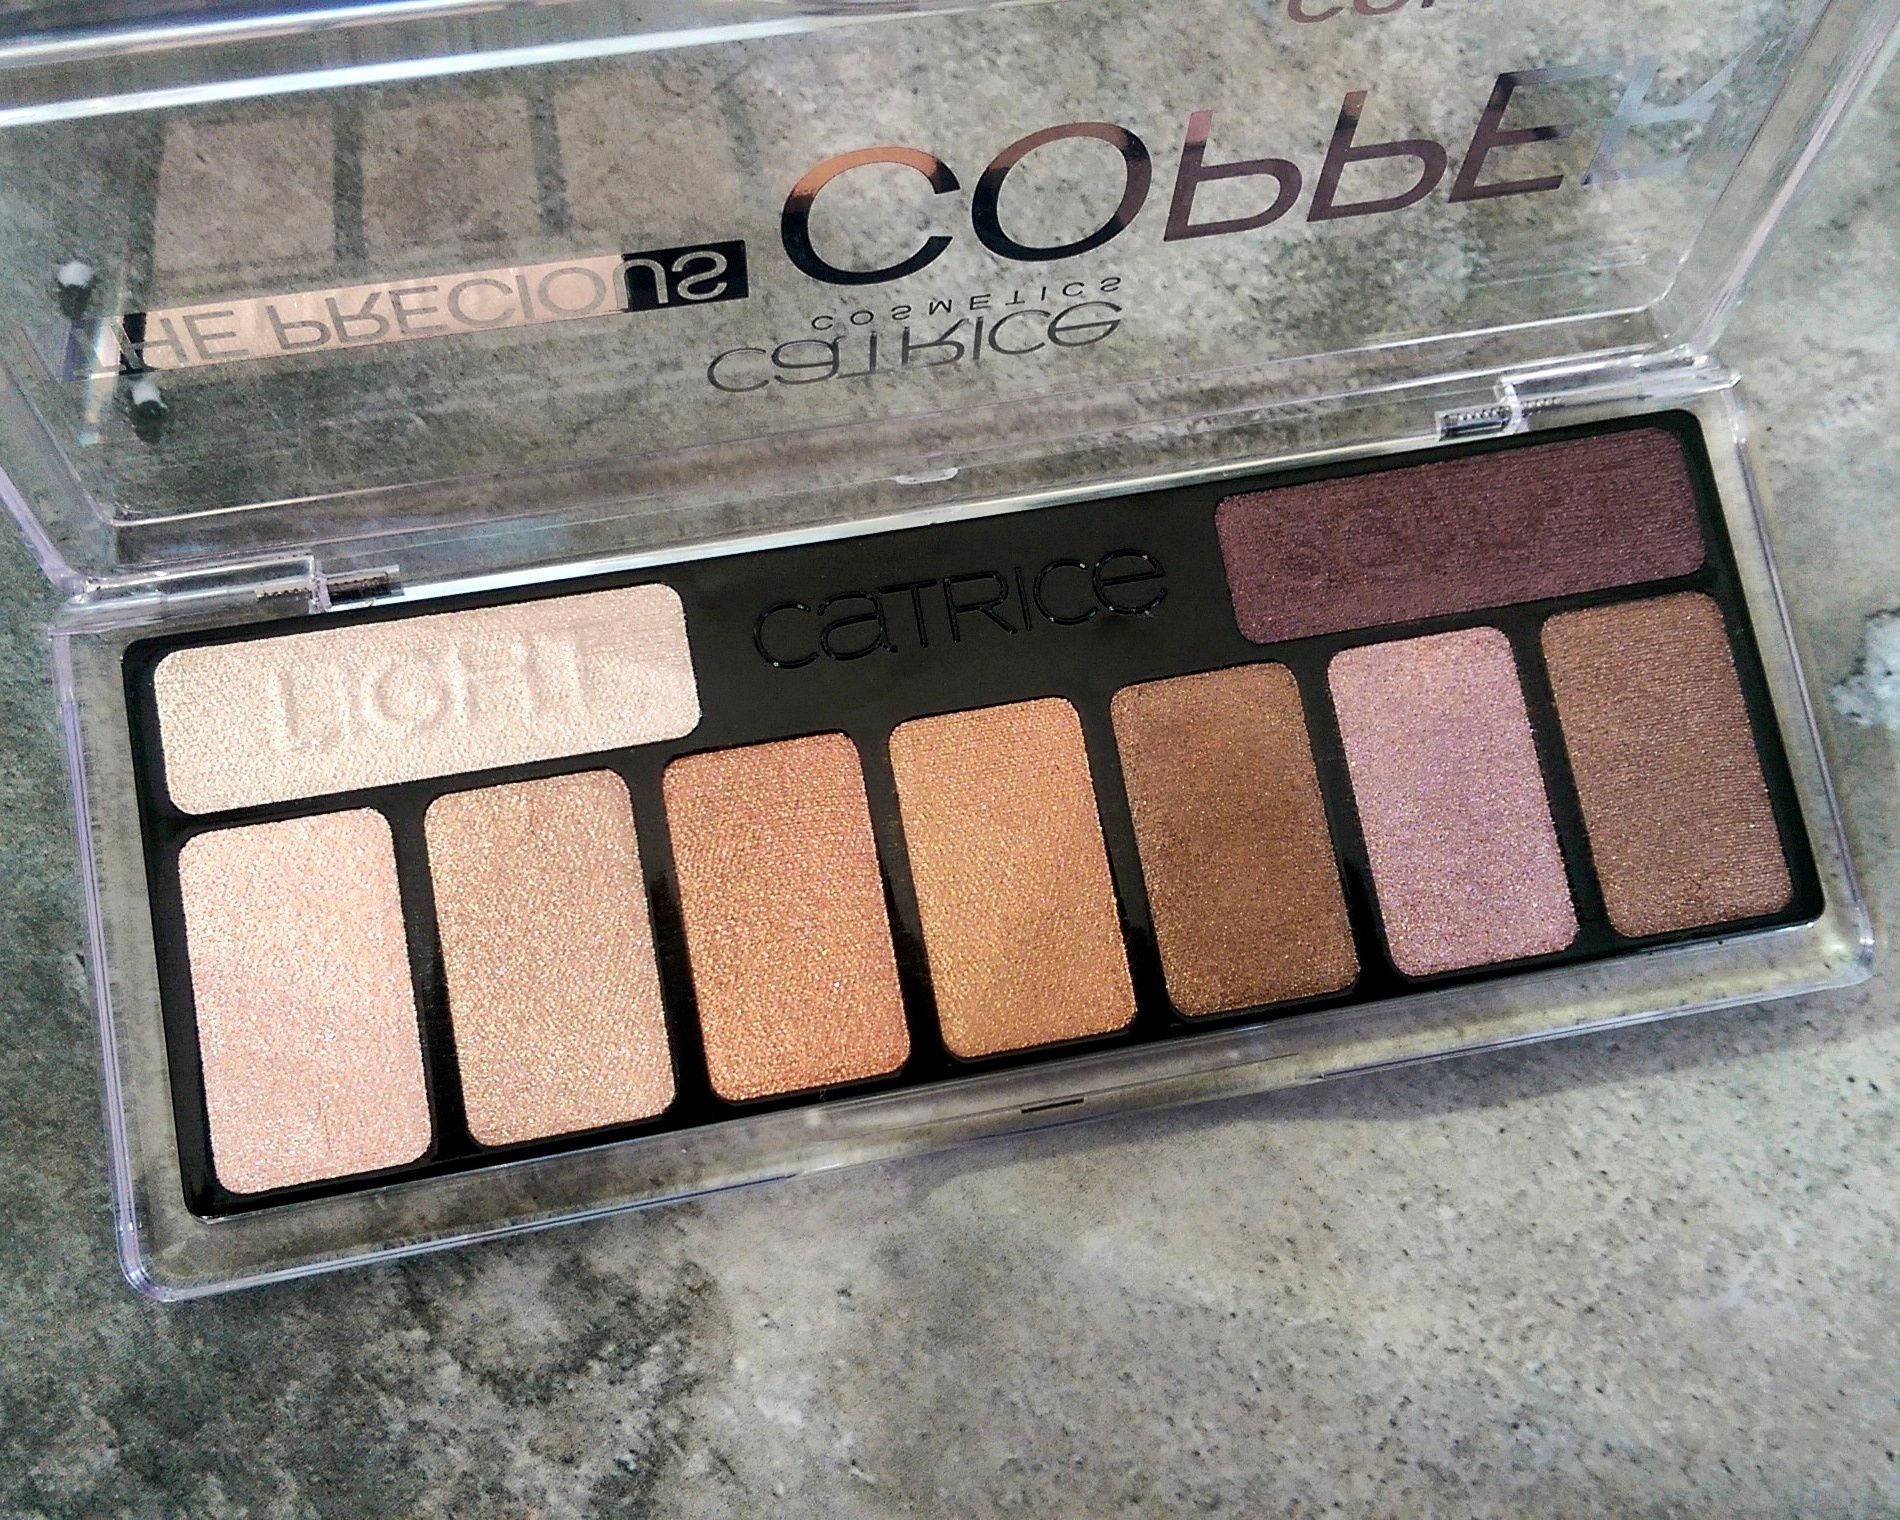 shadow The eye my palette Copper Review: is Life Precious Lipgloss – Catrice